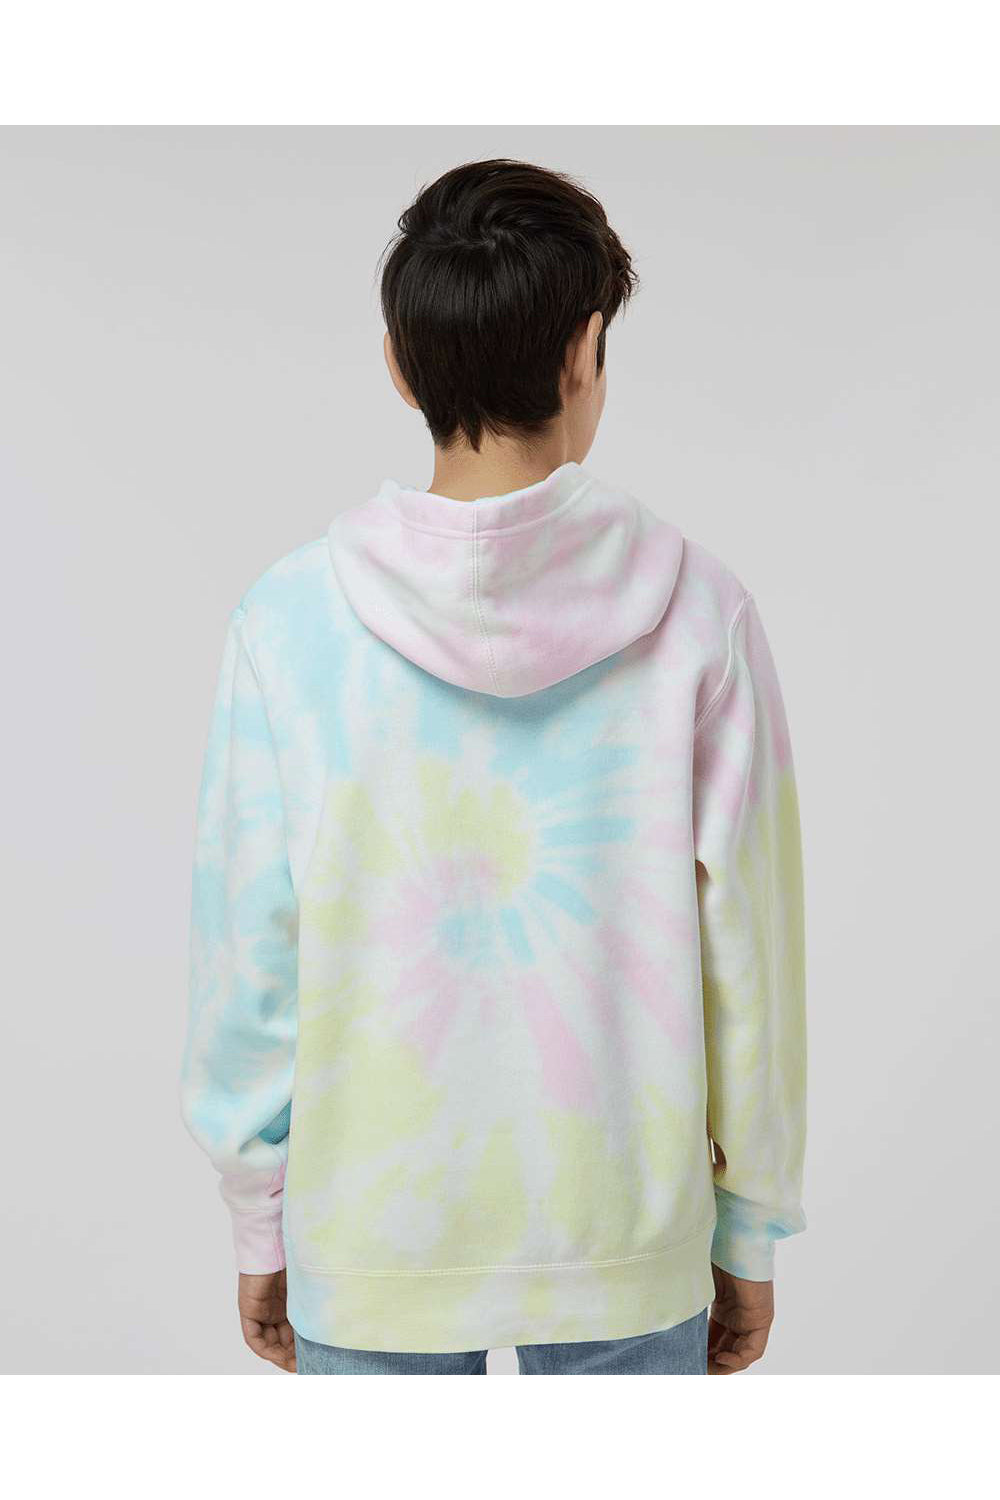 Independent Trading Co. PRM1500TD Youth Tie-Dye Hooded Sweatshirt Hoodie Sunset Swirl Model Back